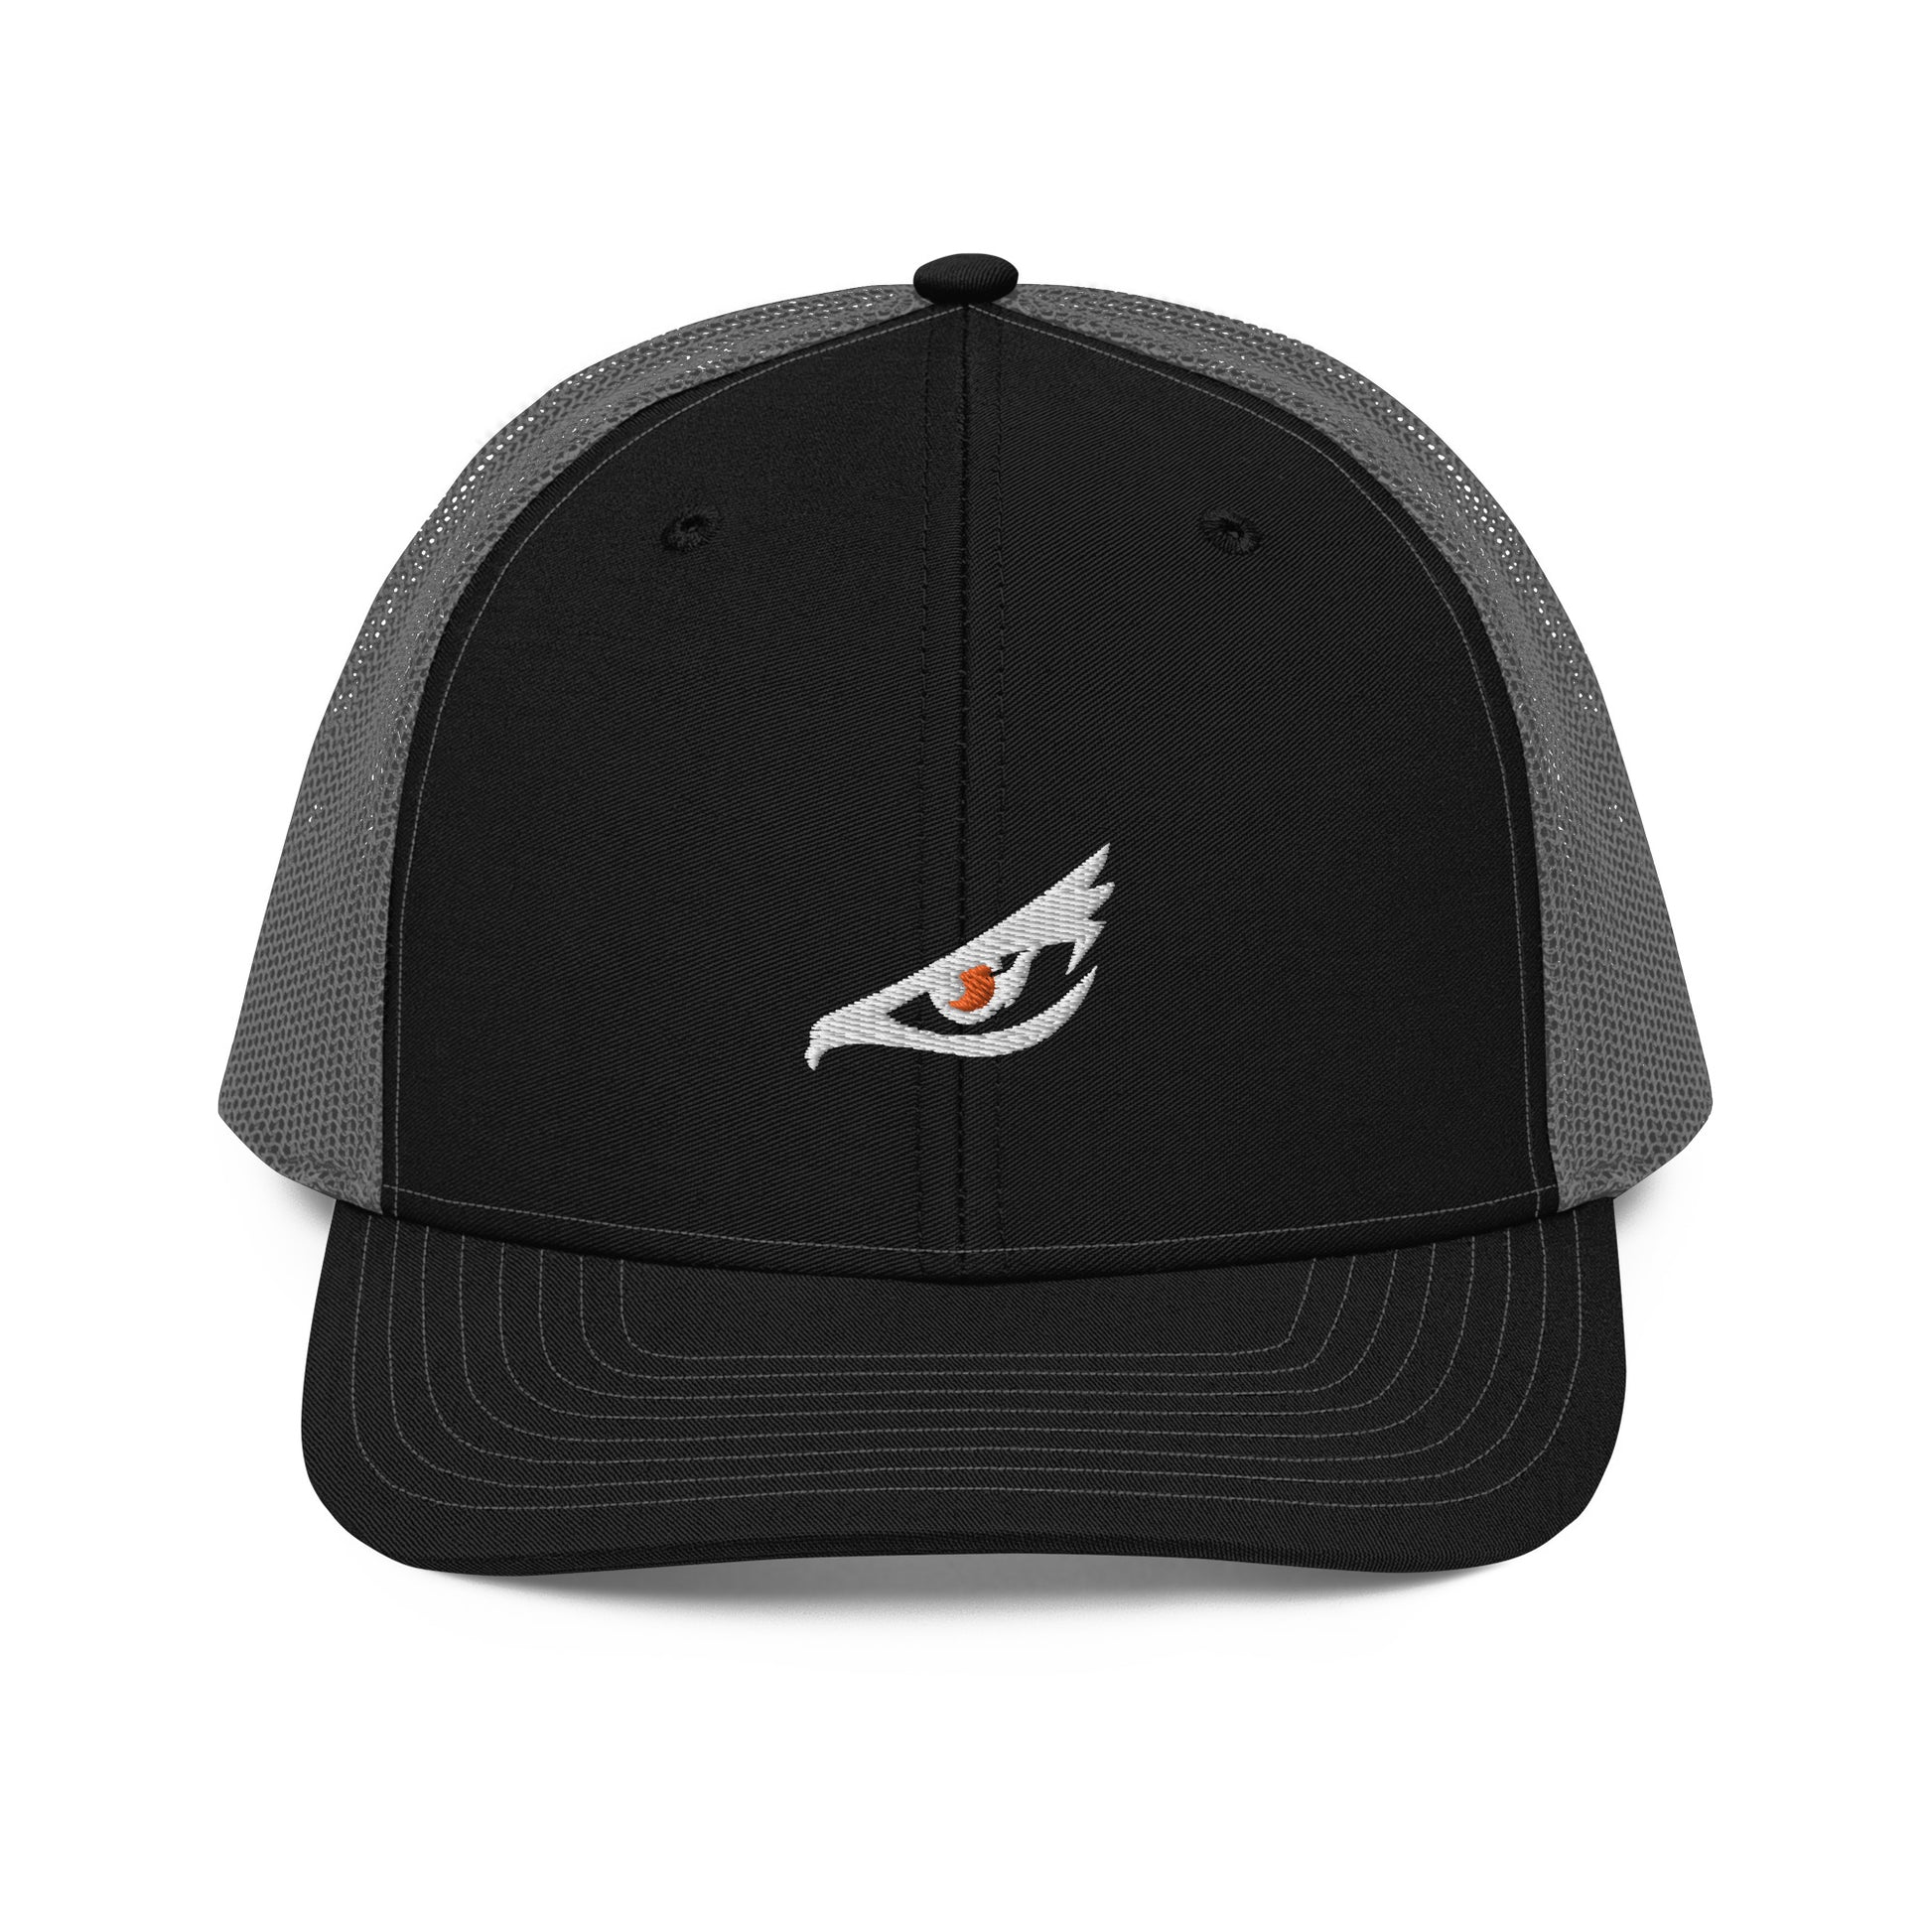 BOP Lifestyle Embroidered Eagle Eye Classic Trucker Cap